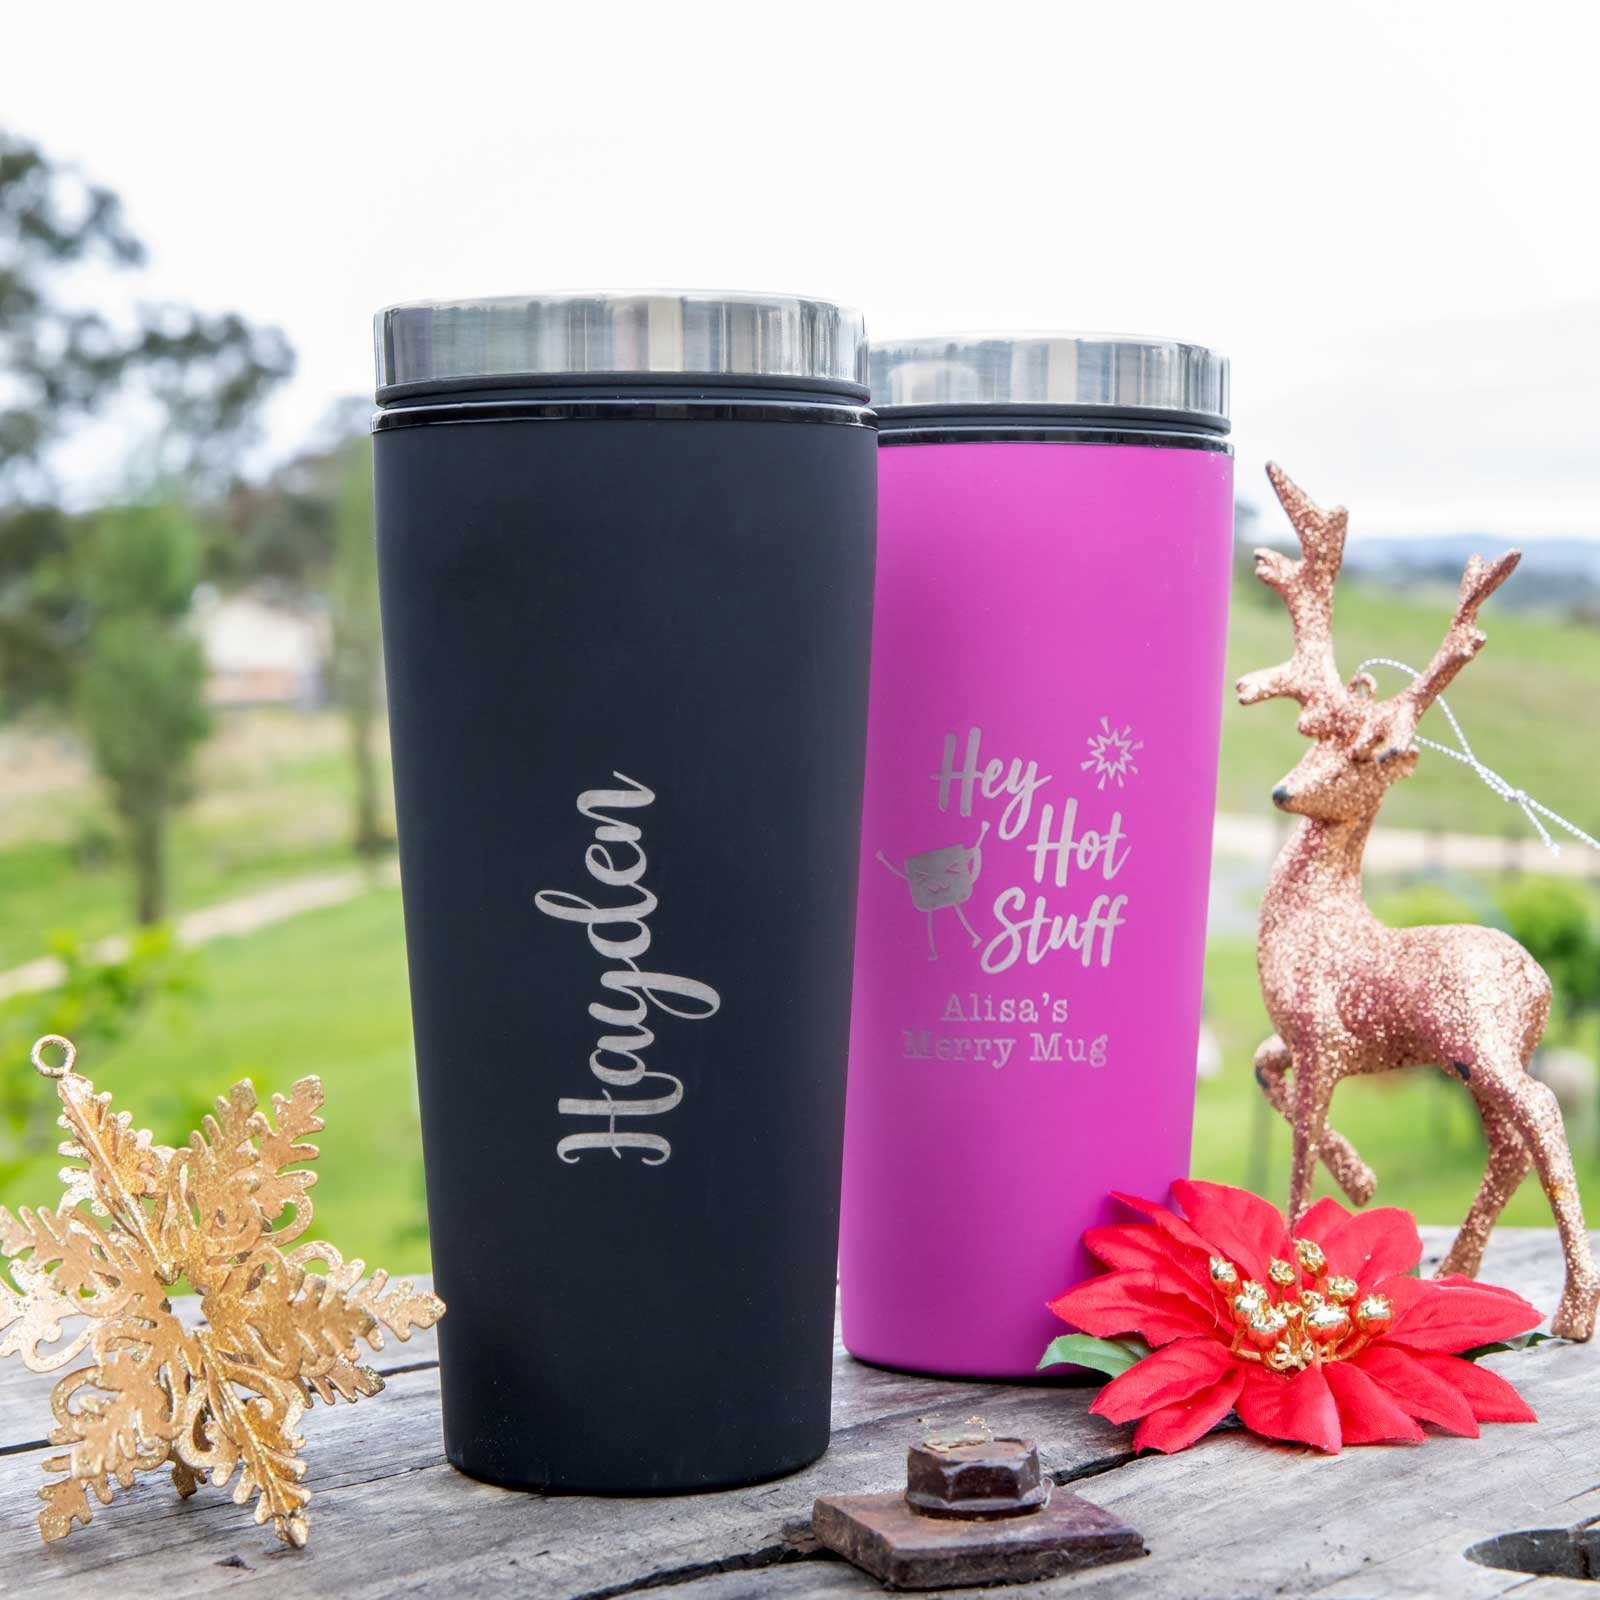 Travel Essential Hands-free Luggage Cup Holder. Carry Two Cups, Bottles.  Functional and Practical Gift for Friends, Families and Yourself. 